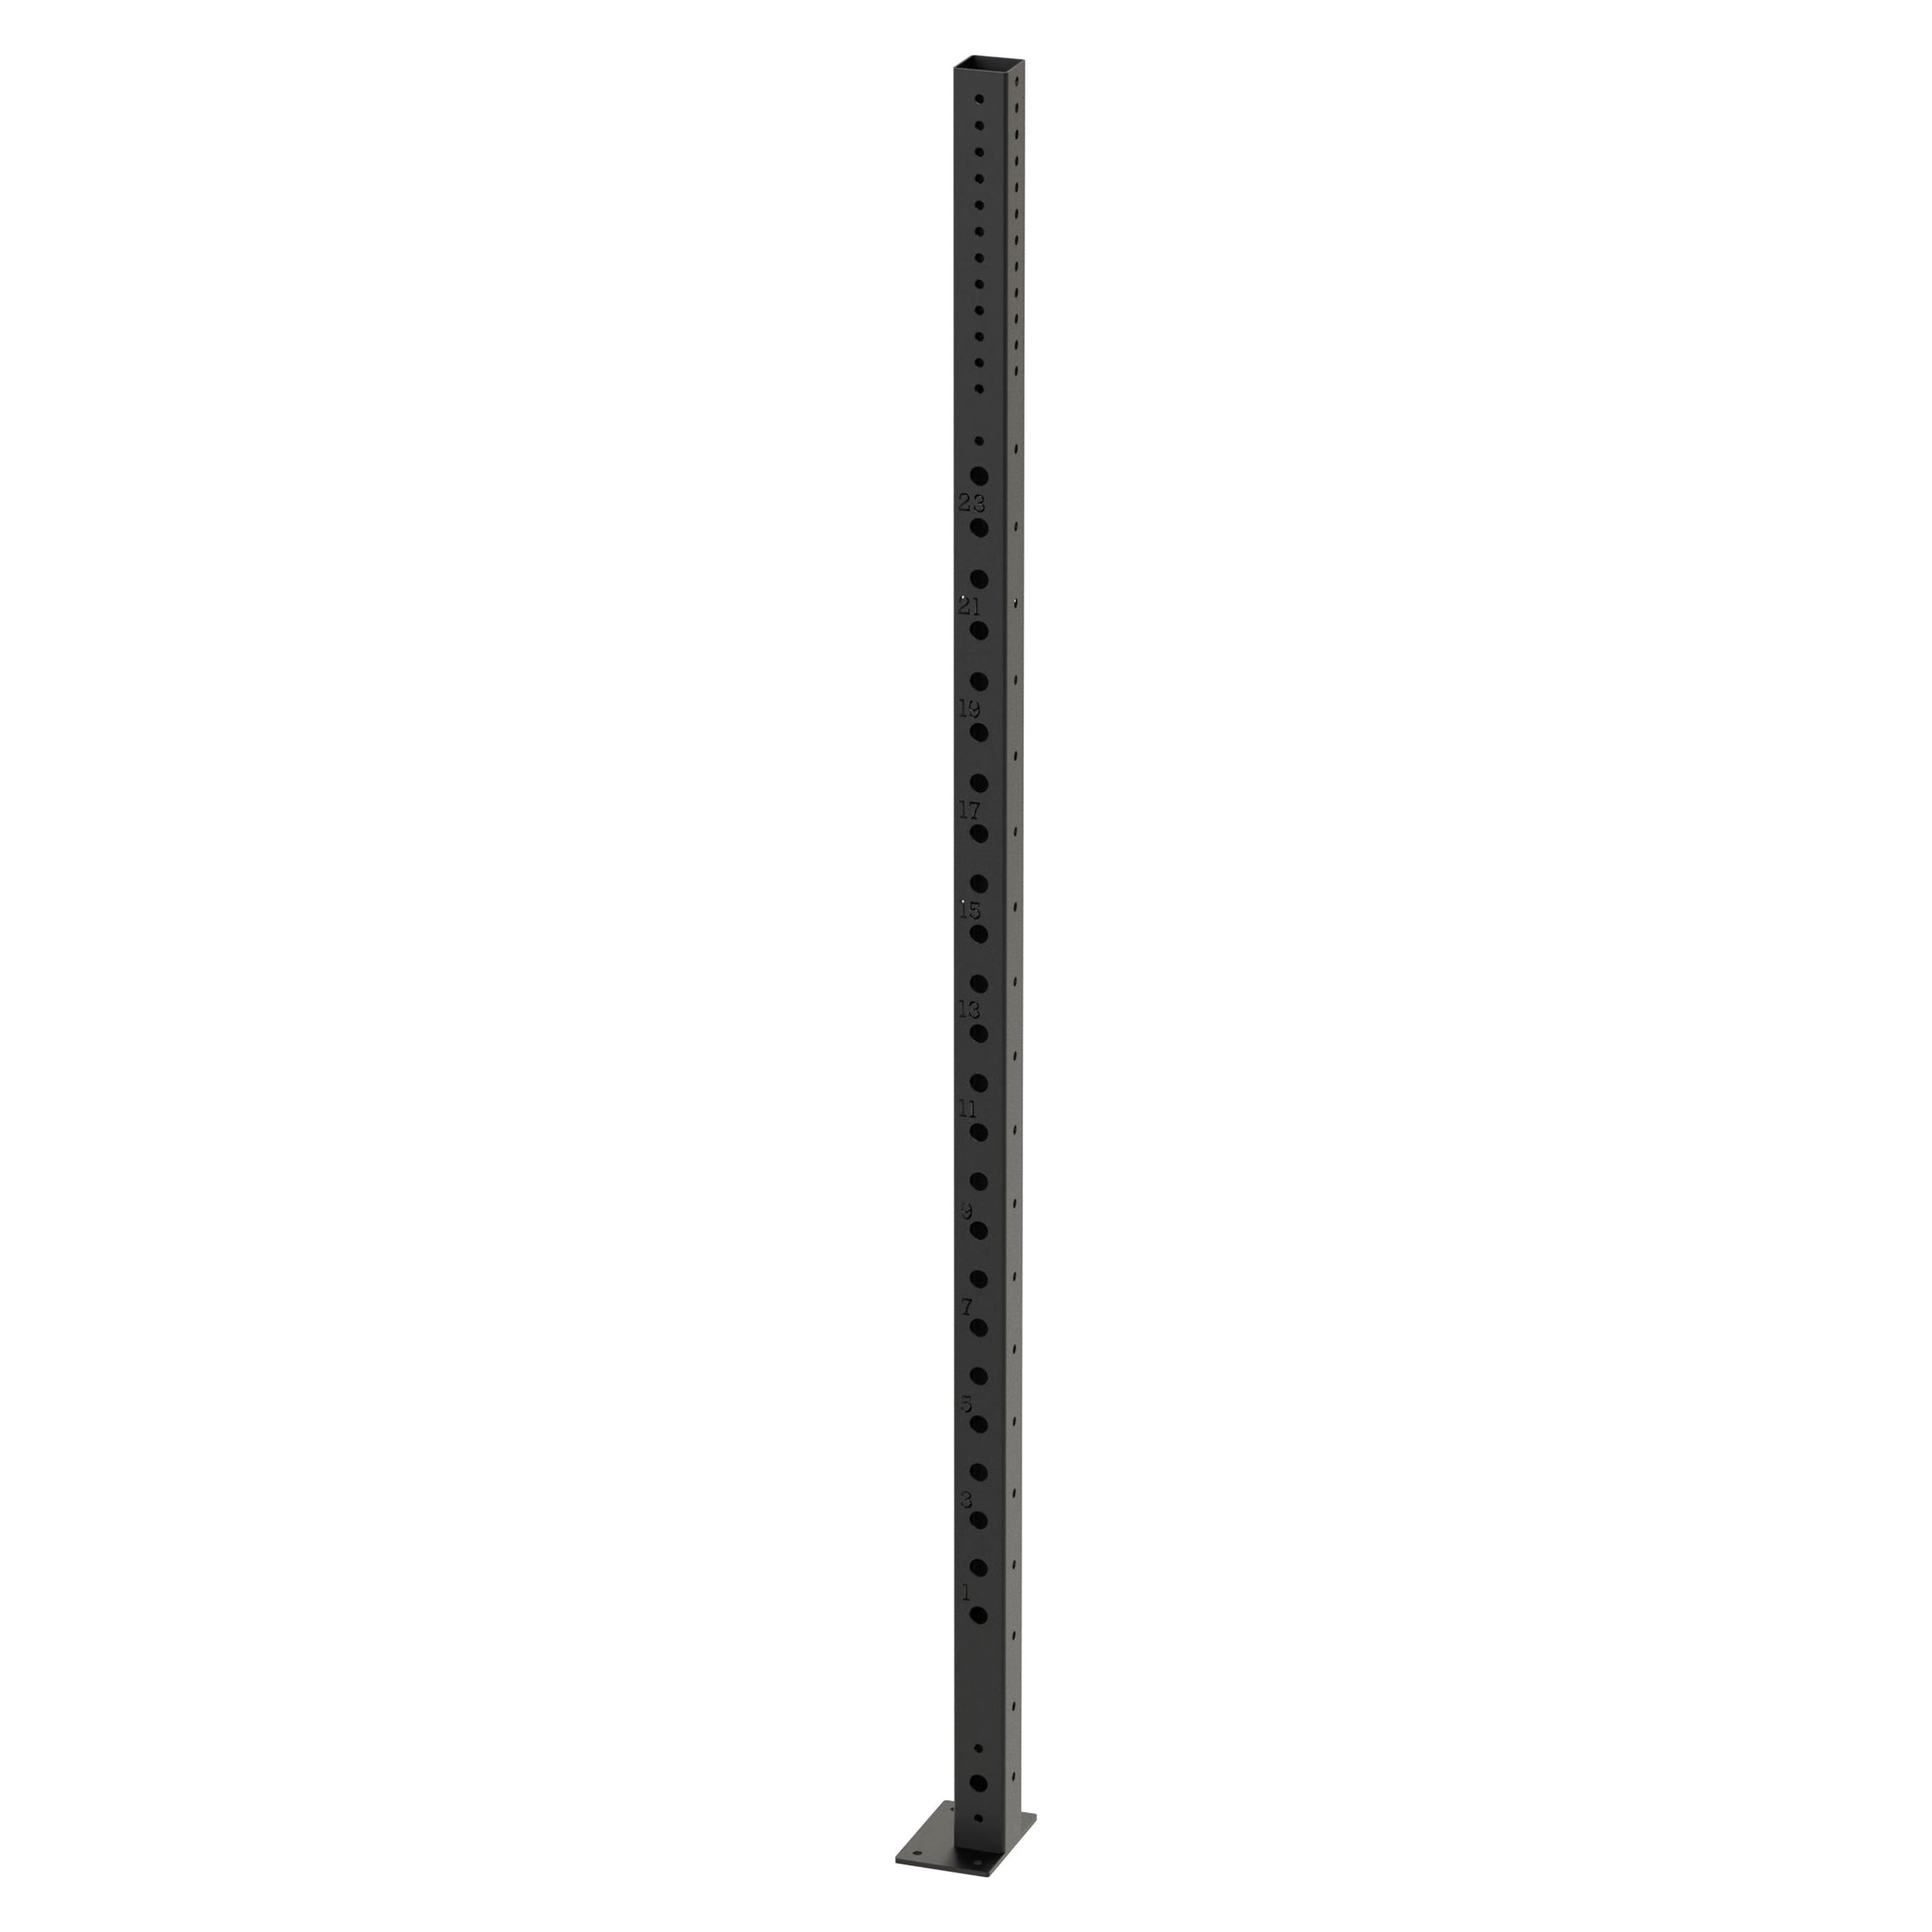 Bison Series - 2.5m Upright - Wolverson Fitness